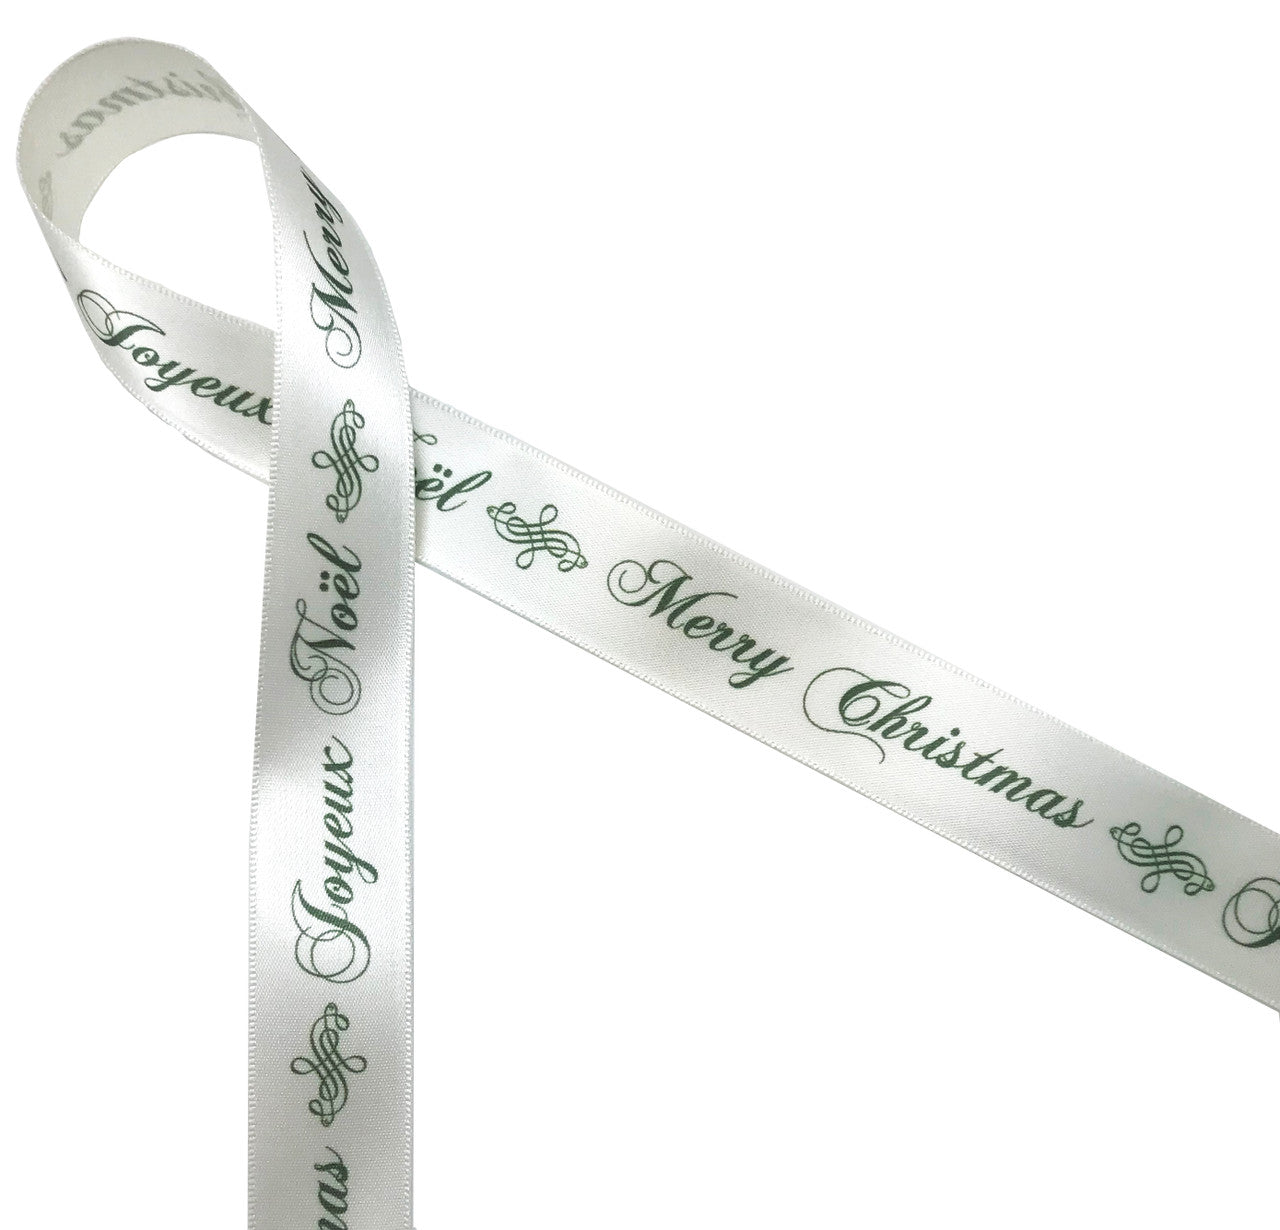 Merry Christmas Joyeux Noel in sage on 7/8" antique white ribbon is a romantic remembrance of an old fashioned Christmas. Make this special ribbon part of your Holiday celebrations!